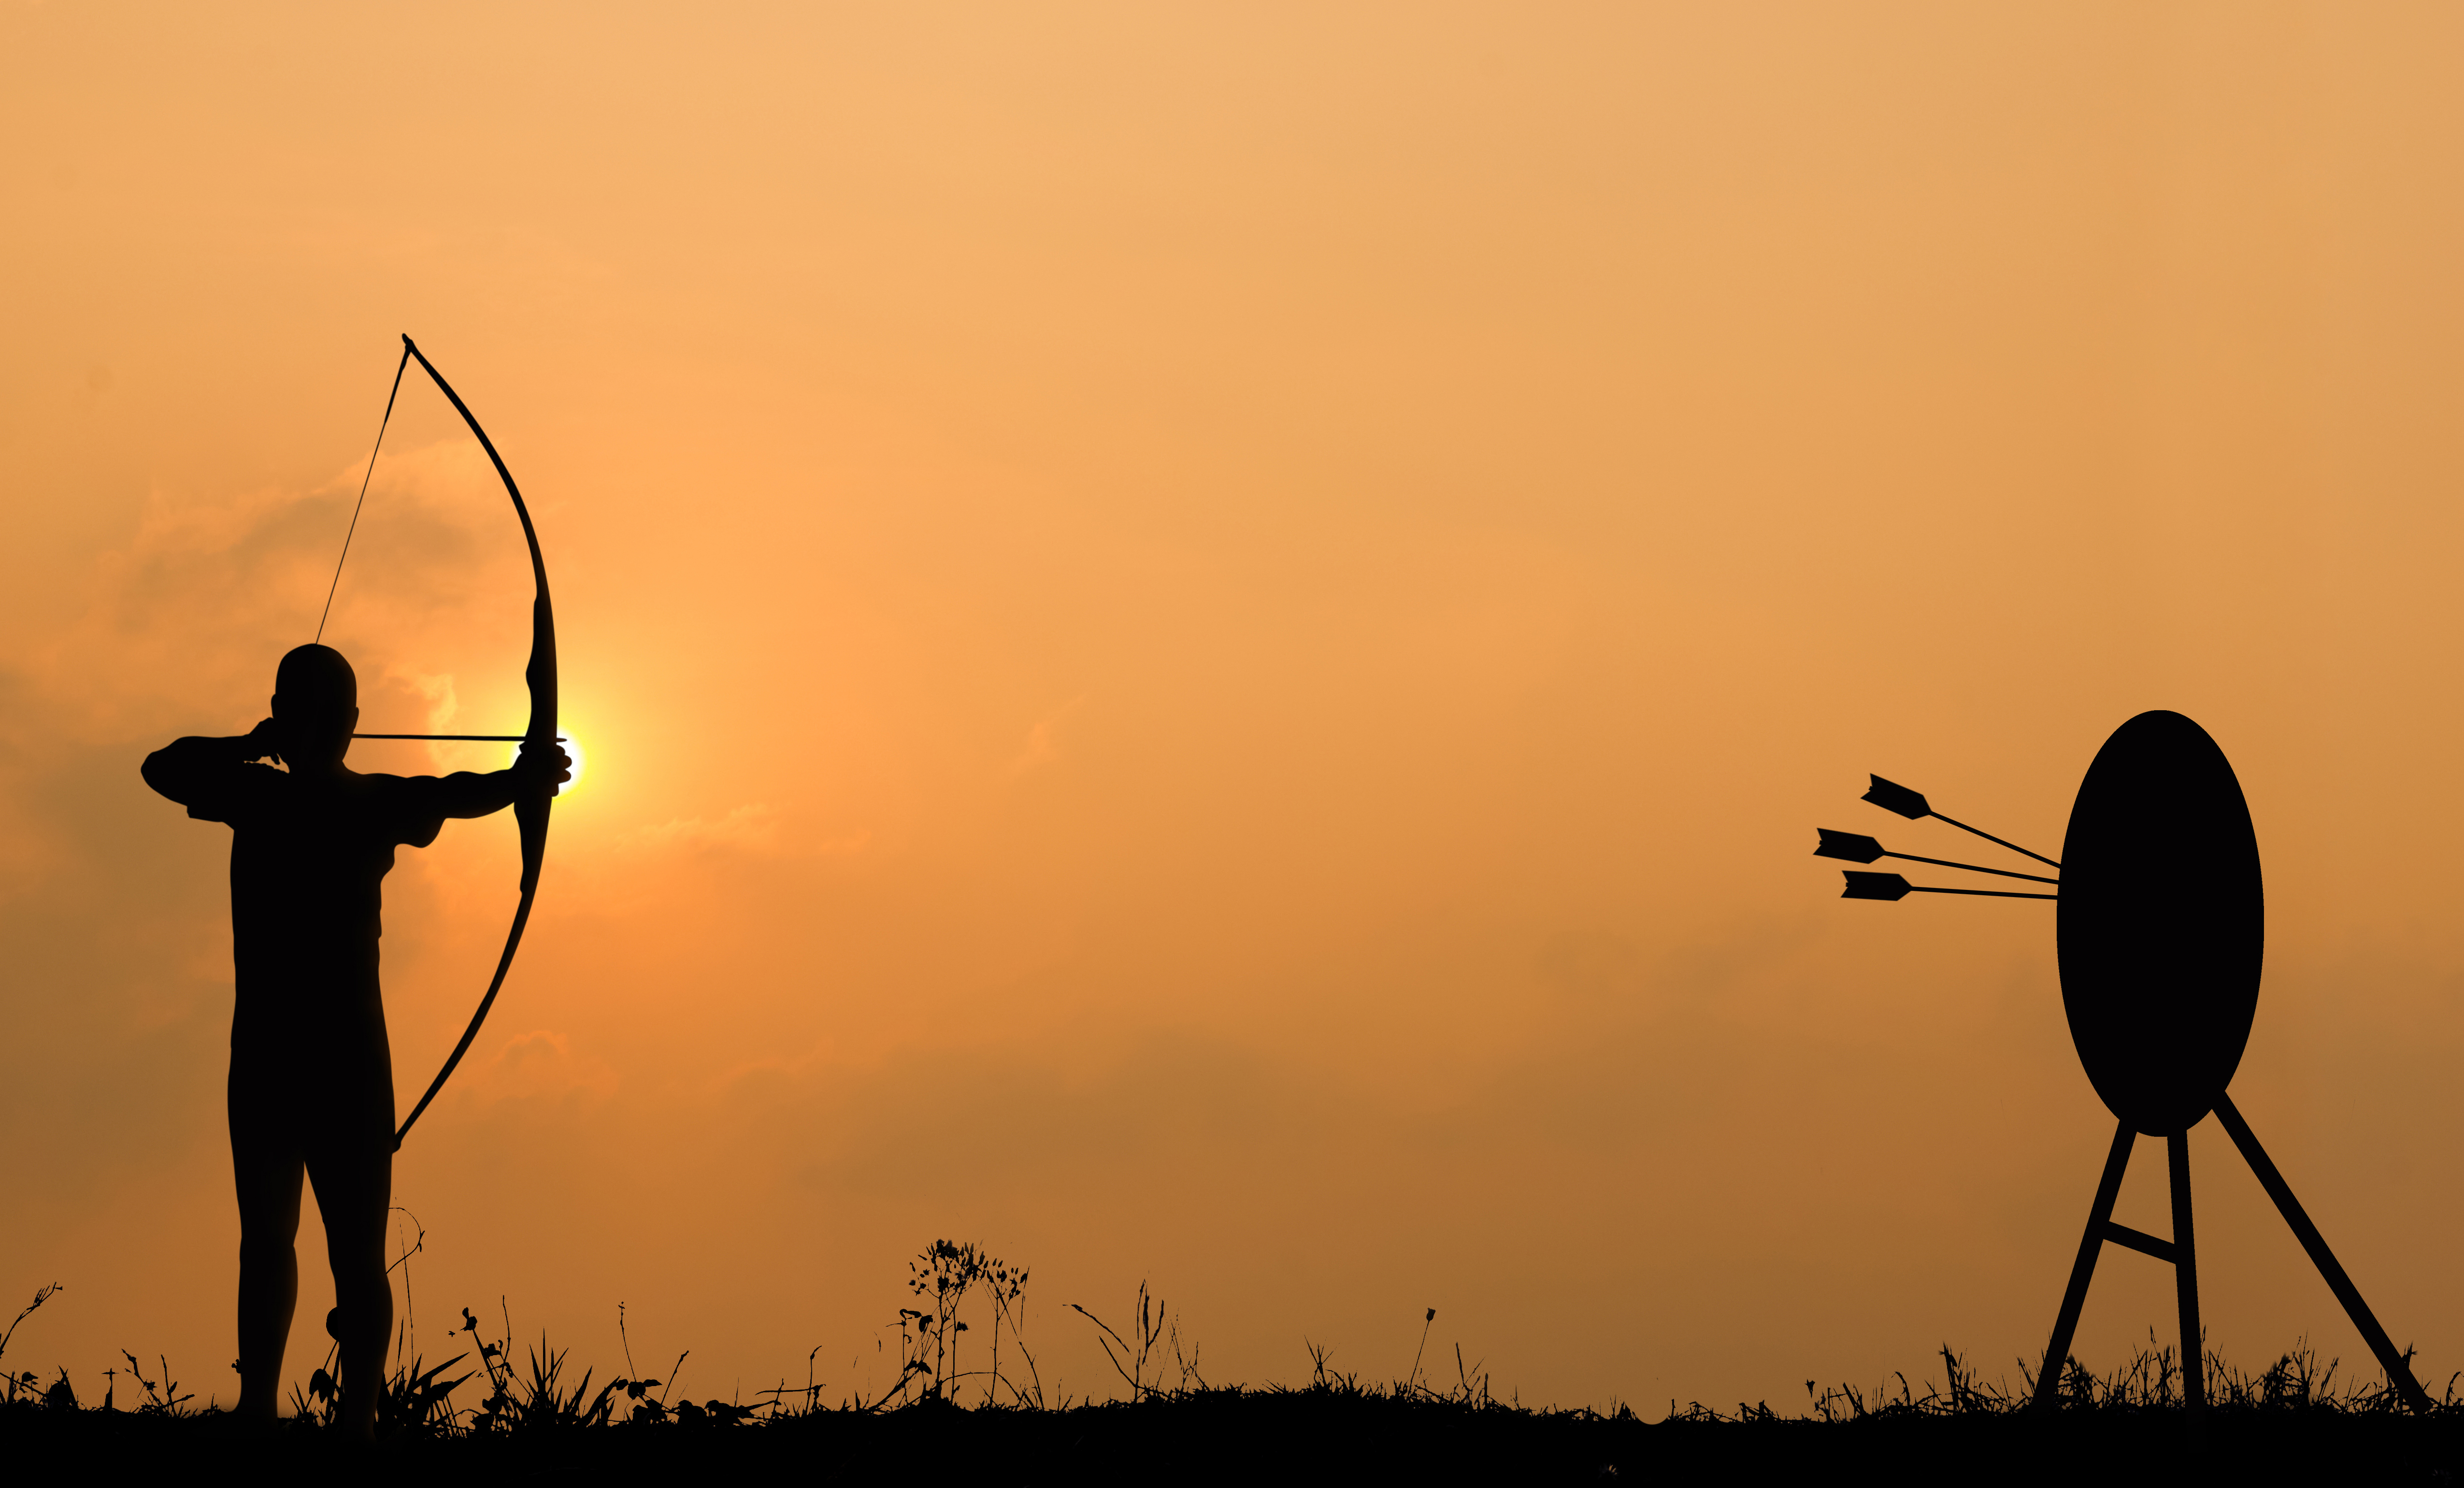 Silhouette of a person shooting a bow and arrow at dusk